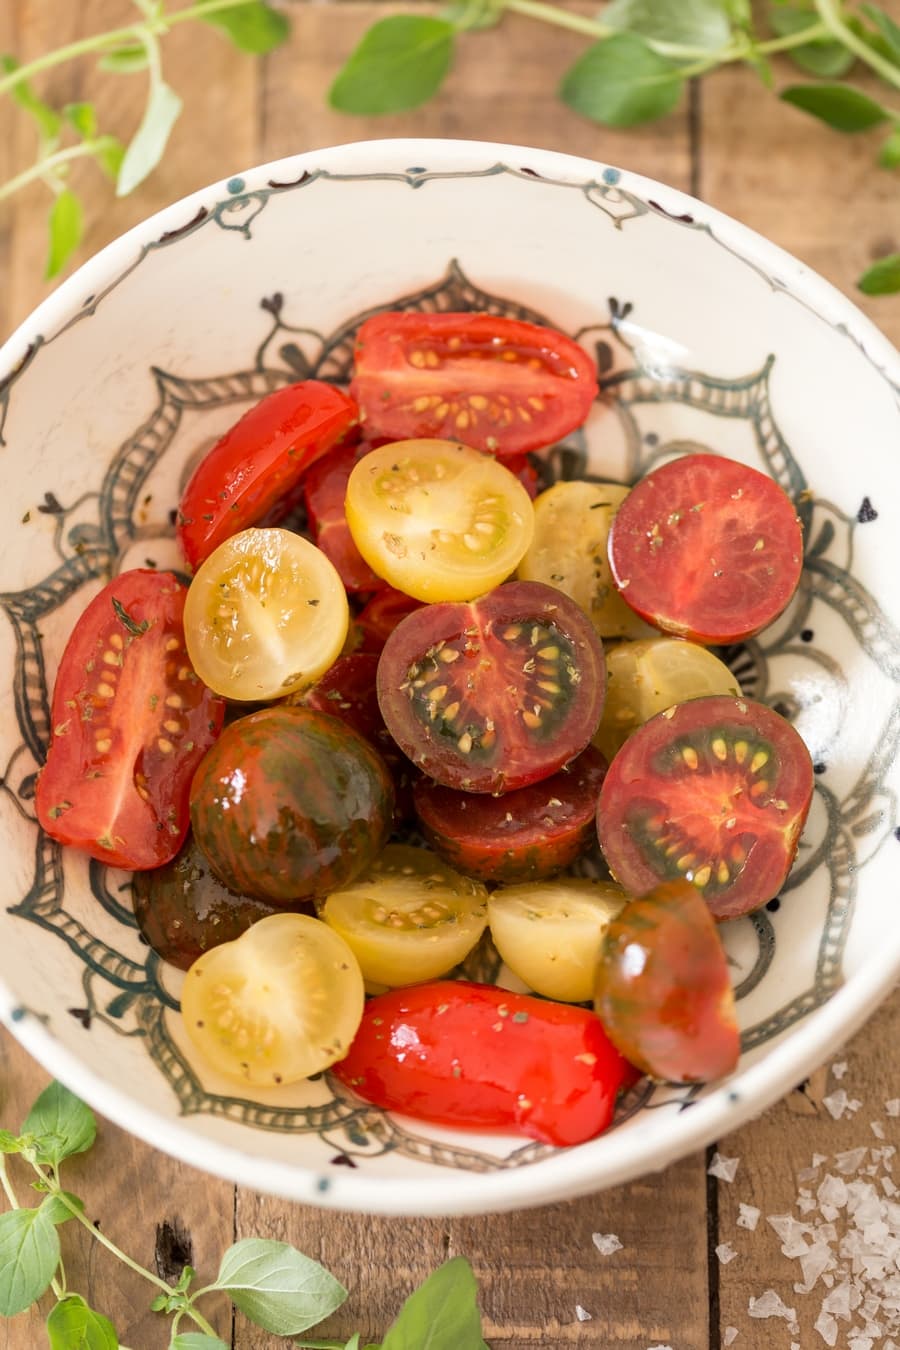 Halved cherry tomatoes in a bowl, seasoned with oil and oregano.